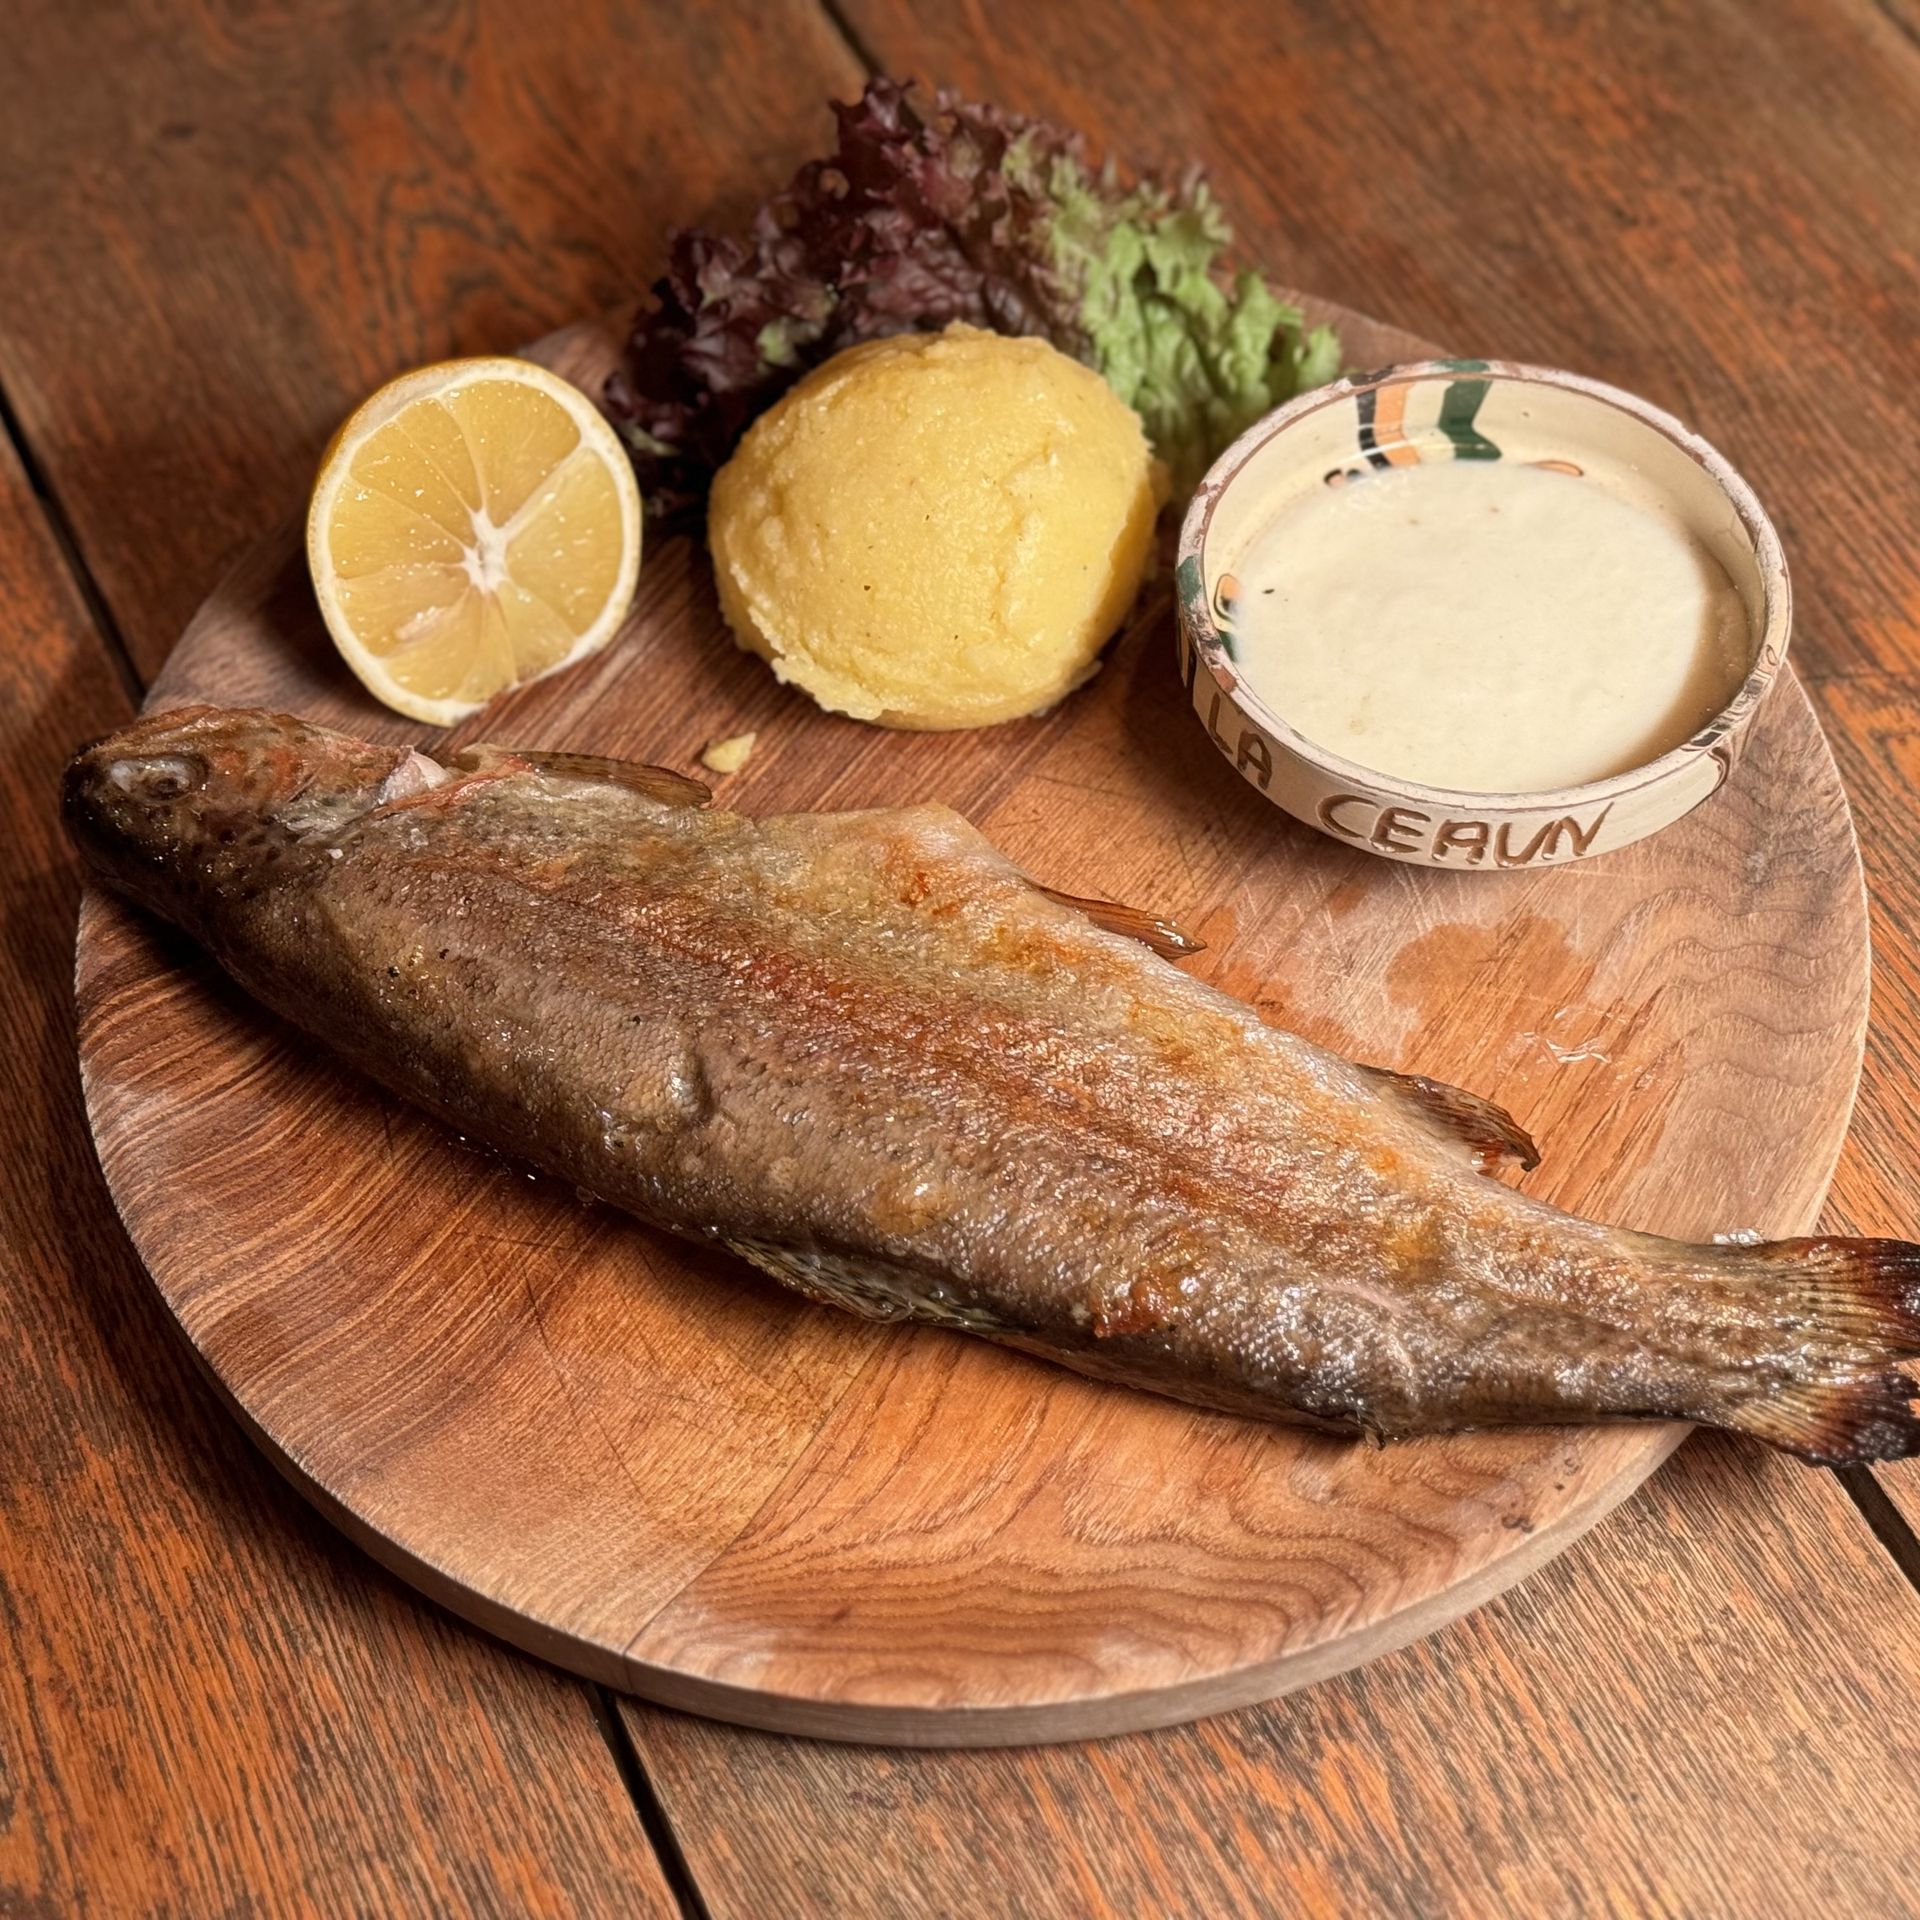 Grilled trout with polenta and garlic sauce - 450 g